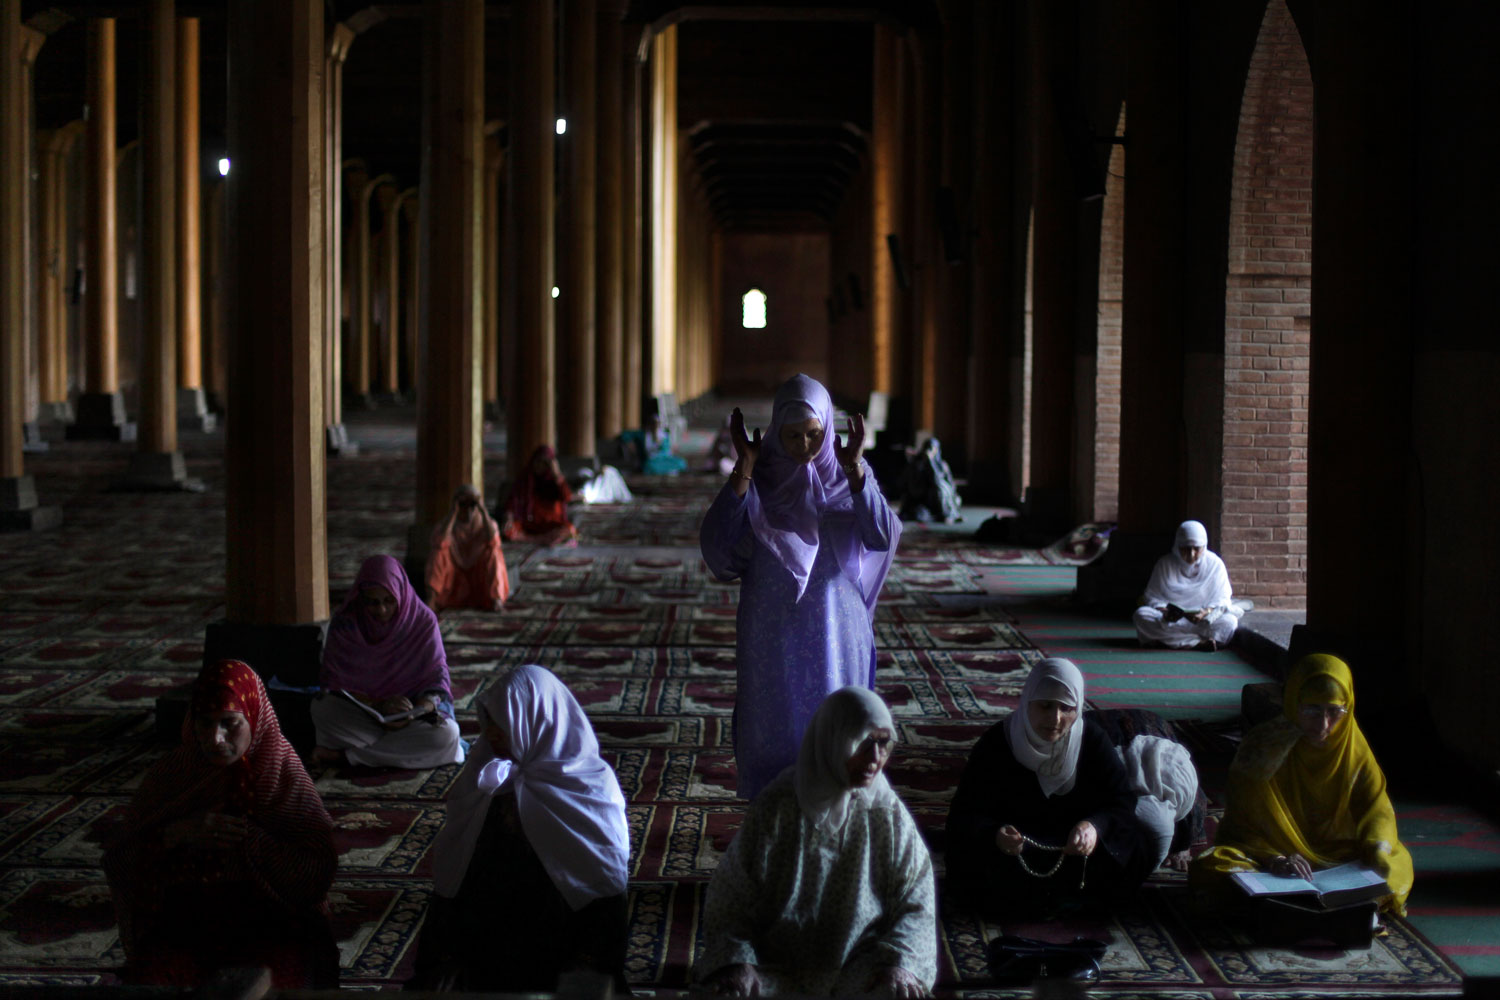 August 10, 2011.Kashmiri Muslim women pray inside the Jamia Mosque in Srinagar, India. Muslims around the world are marking the holy fasting month of Ramadan, where the devout fast from dawn until dusk.